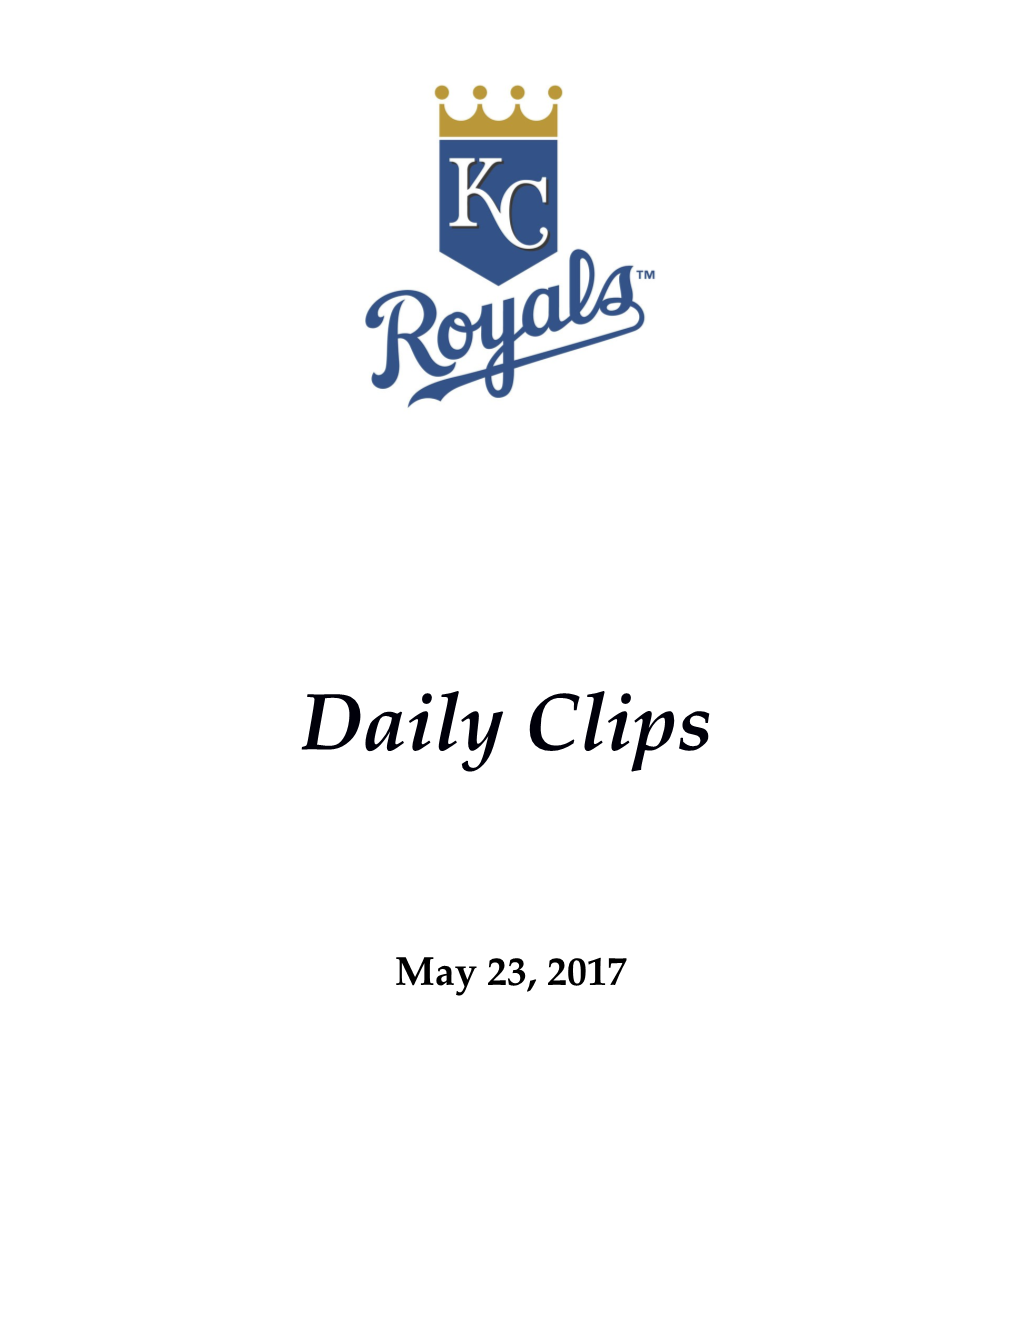 Close Call Doesn't Go KC's Way As Royals Fall